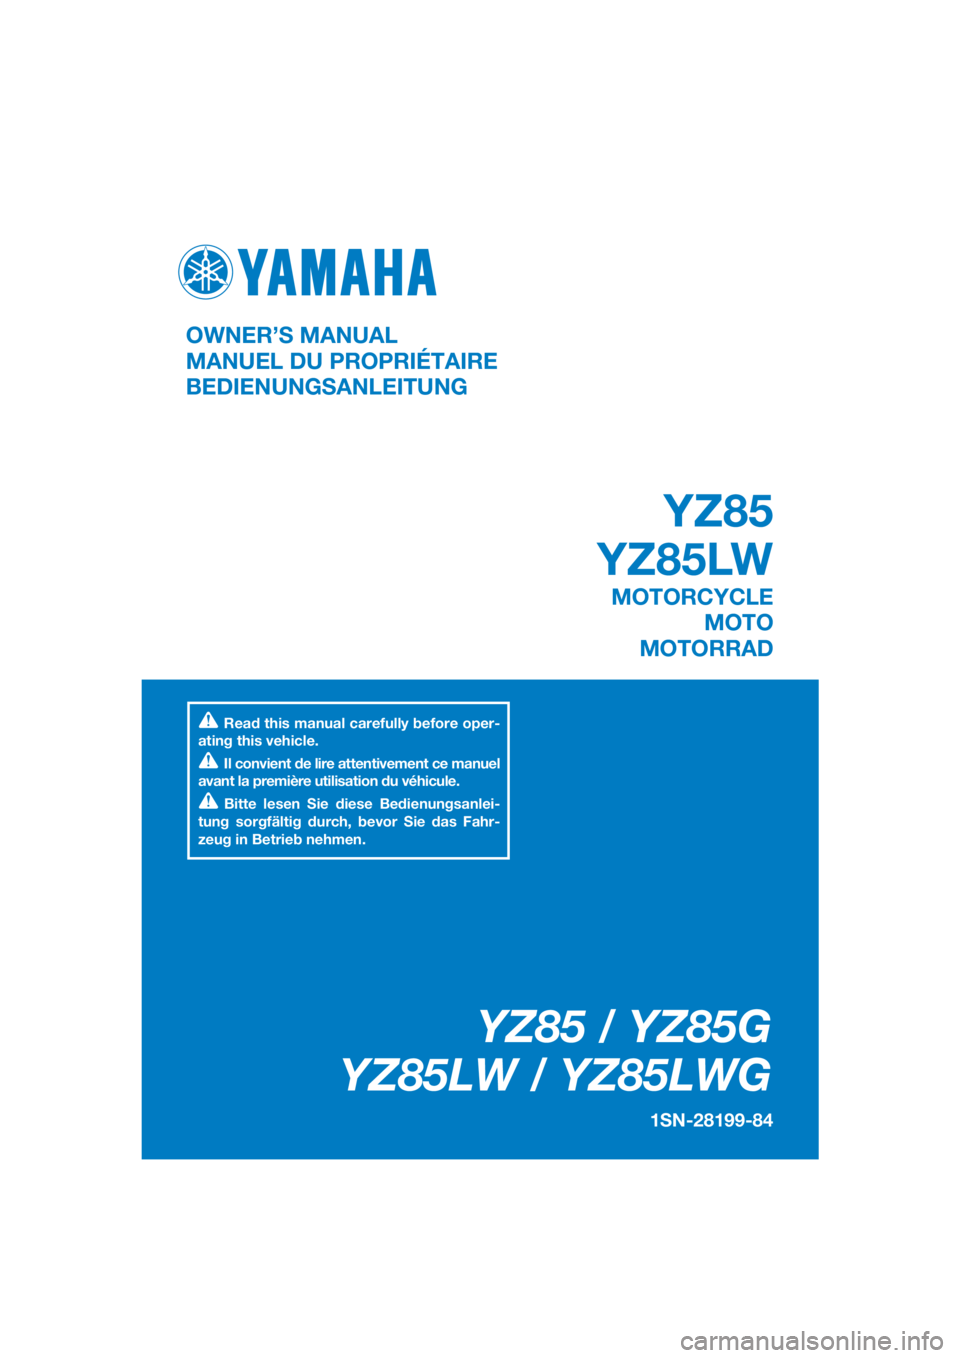 YAMAHA YZ85 2016  Betriebsanleitungen (in German) DIC183
YZ85 / YZ85G
YZ85LW / YZ85LWG
1SN-28199-84
OWNER’S MANUAL
MANUEL DU PROPRIÉTAIRE
BEDIENUNGSANLEITUNG
Read this manual carefully before oper-
ating this vehicle.
Il convient de lire attentive